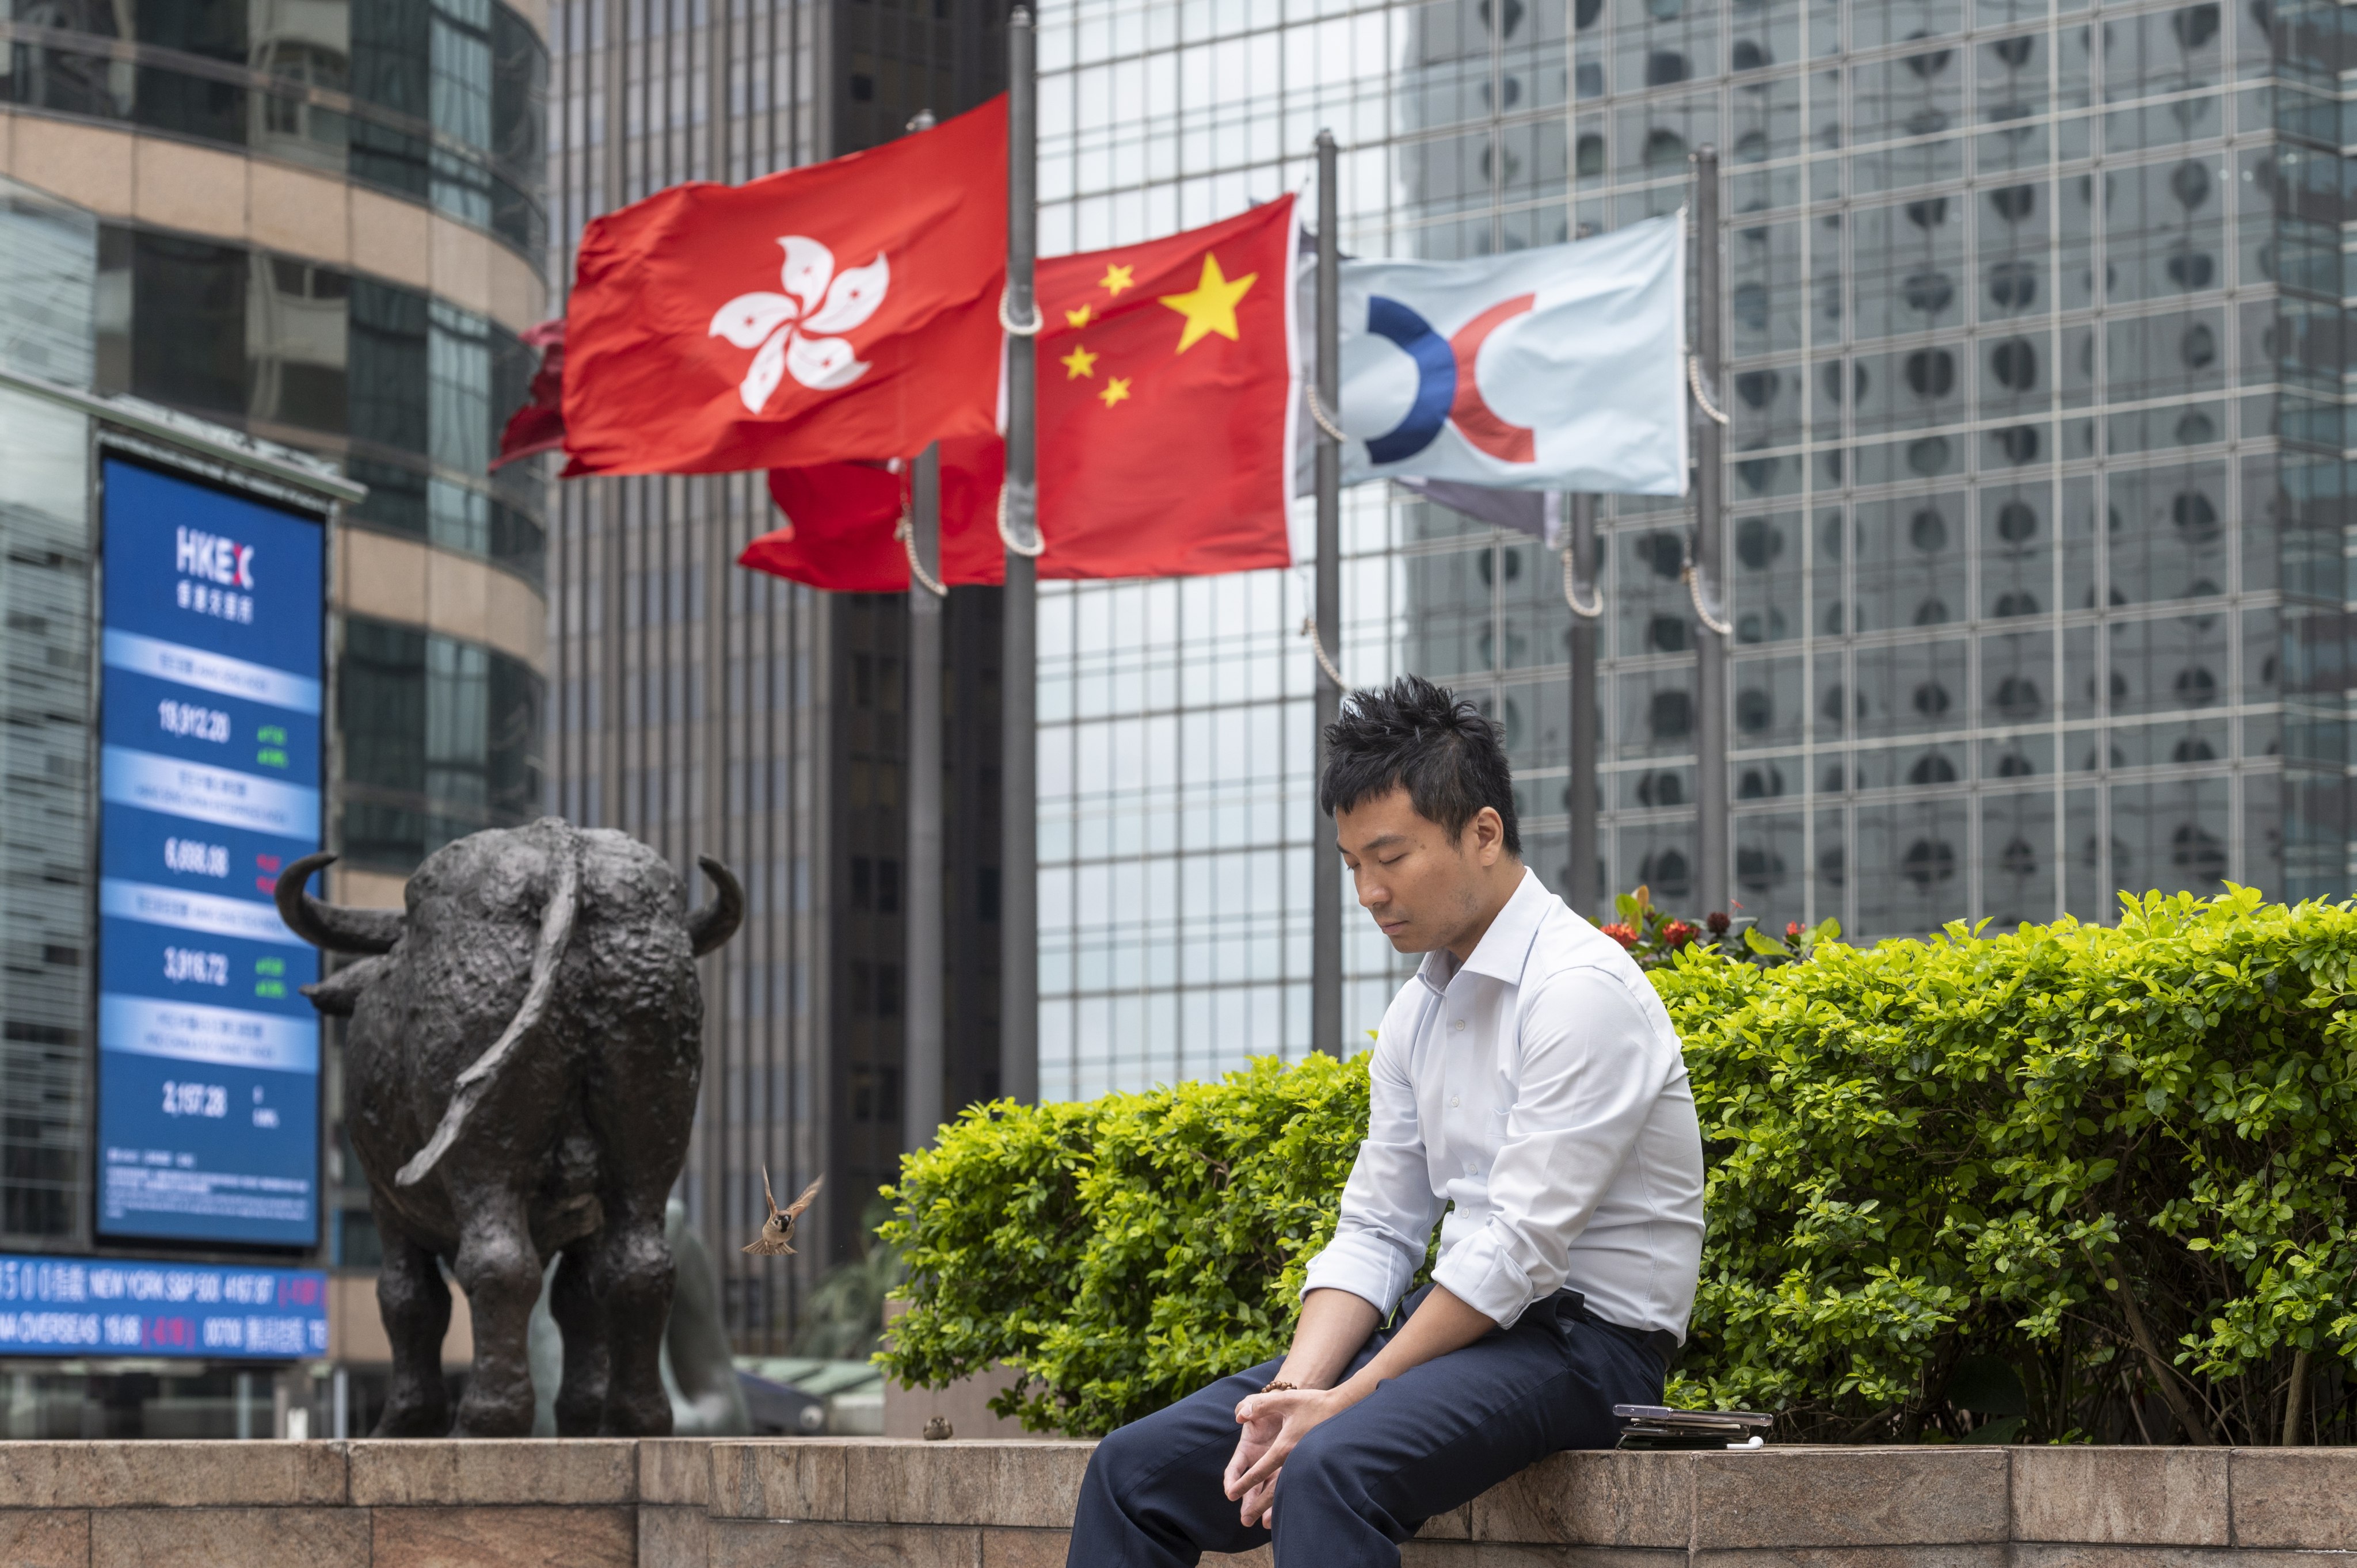 A man rests outside Exchange Square, which houses the Hong Kong stock exchange, on May 2, 2023. External shocks from two wars, US inflation and higher interest rates are taking a toll. Photo: EPA-EFE